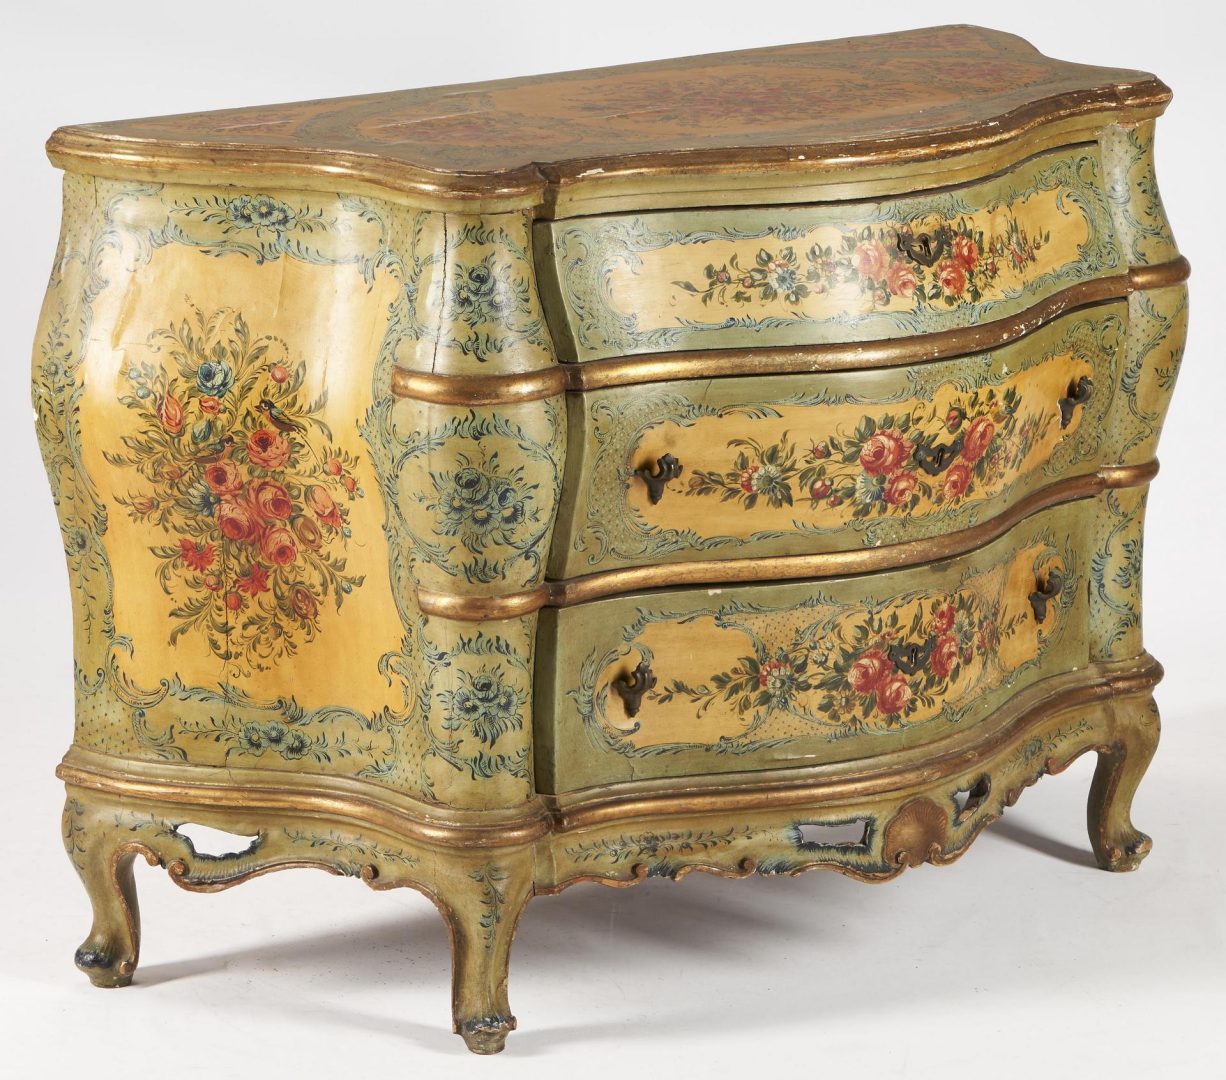 Lot 142: Venetian Polychrome Painted Bombe Chest or Commode